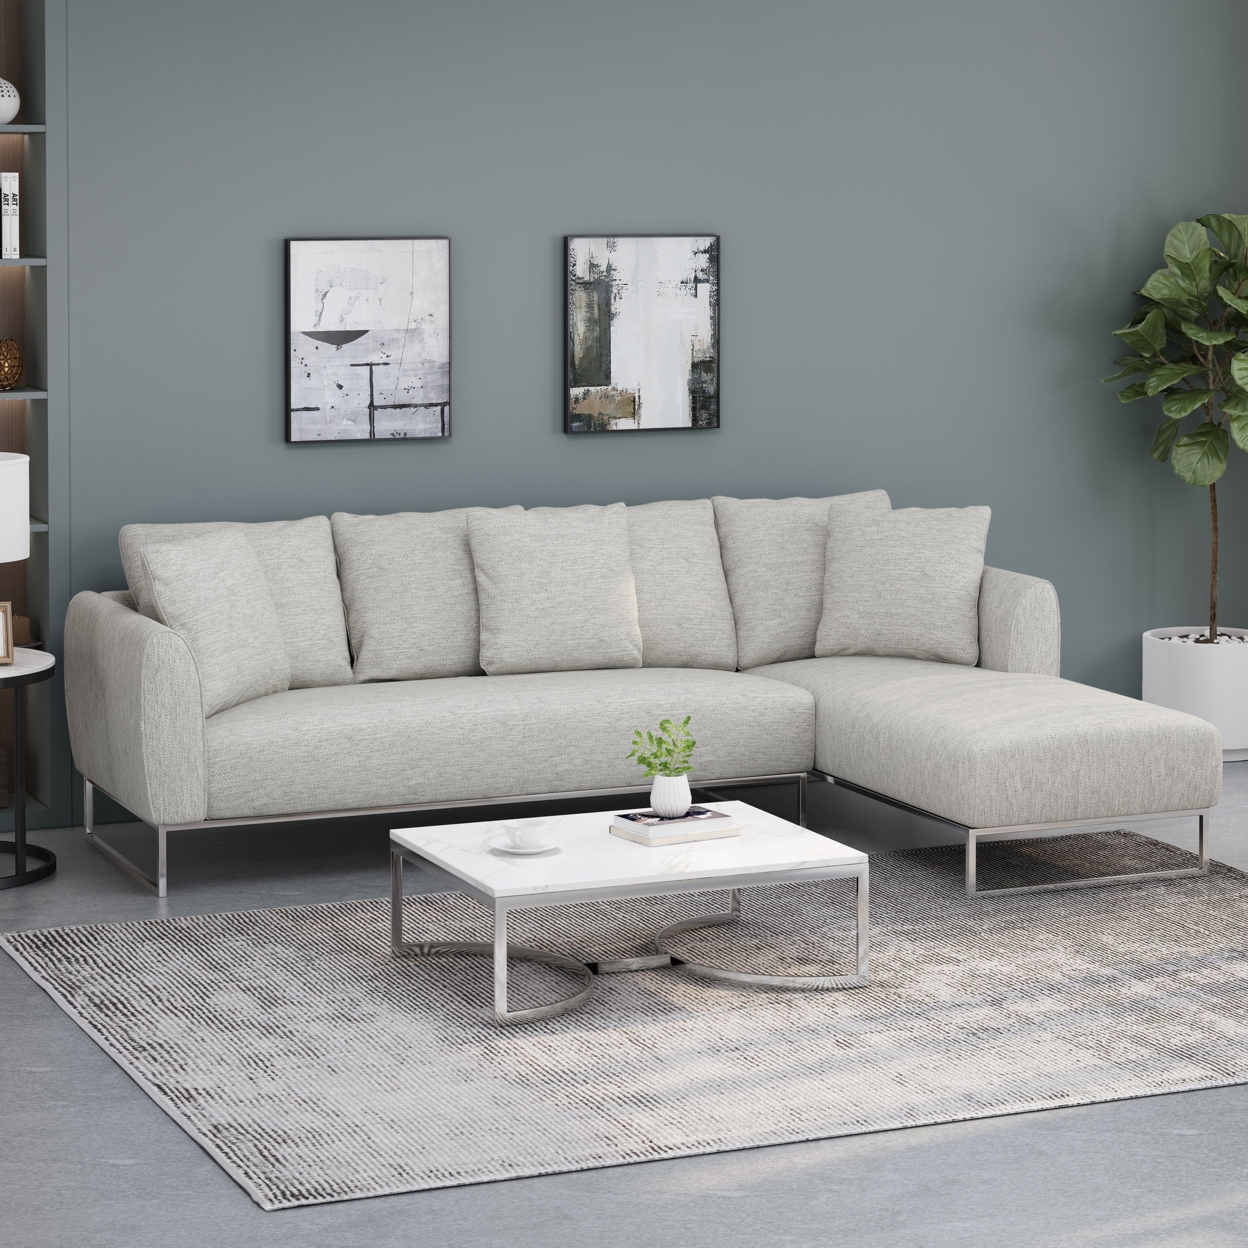 Clarke Contemporary Sectional Sofa With Chaise Lounge - Charcoal